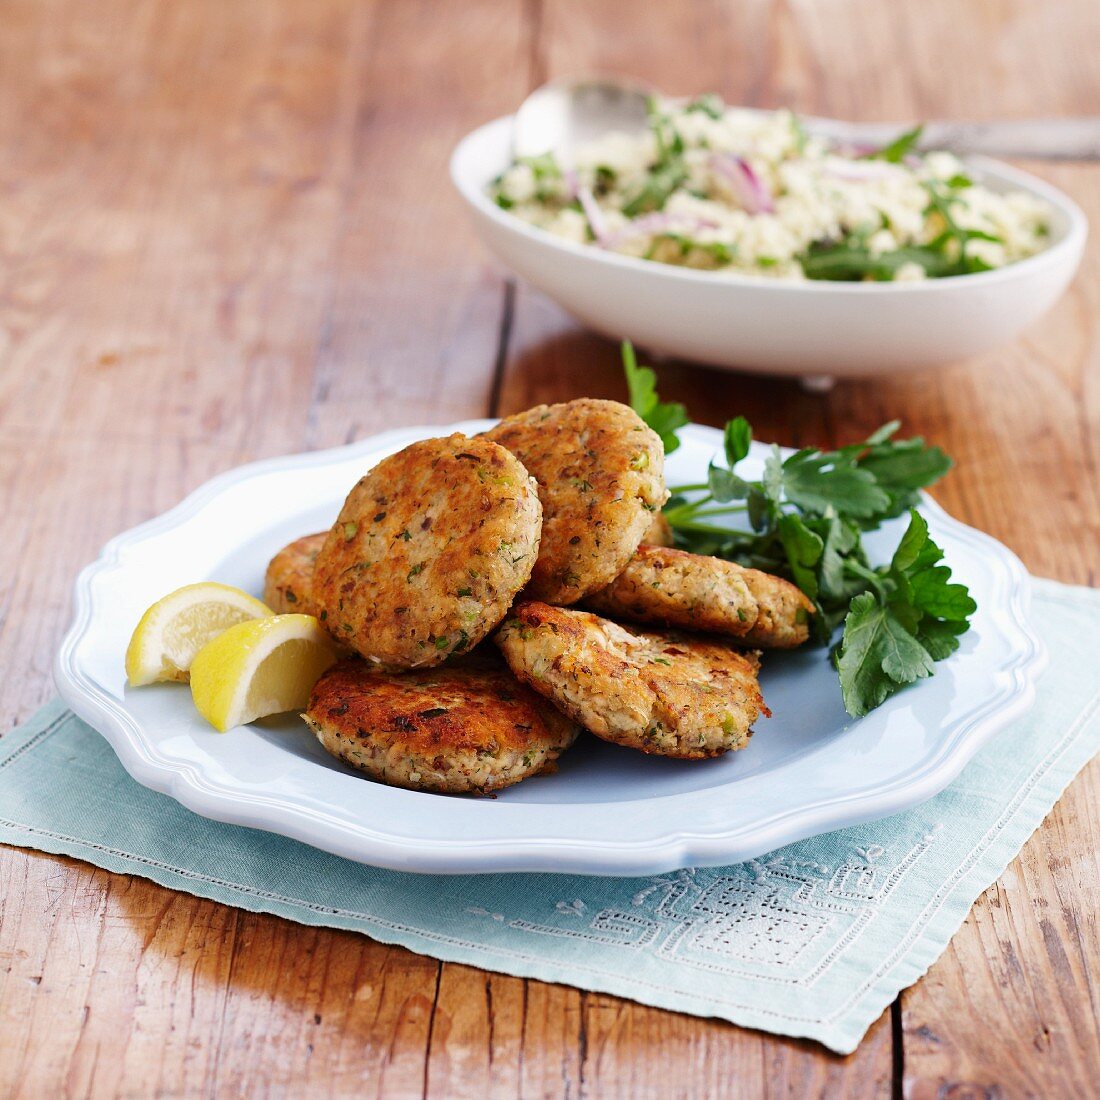 Salmon cakes with couscous salad